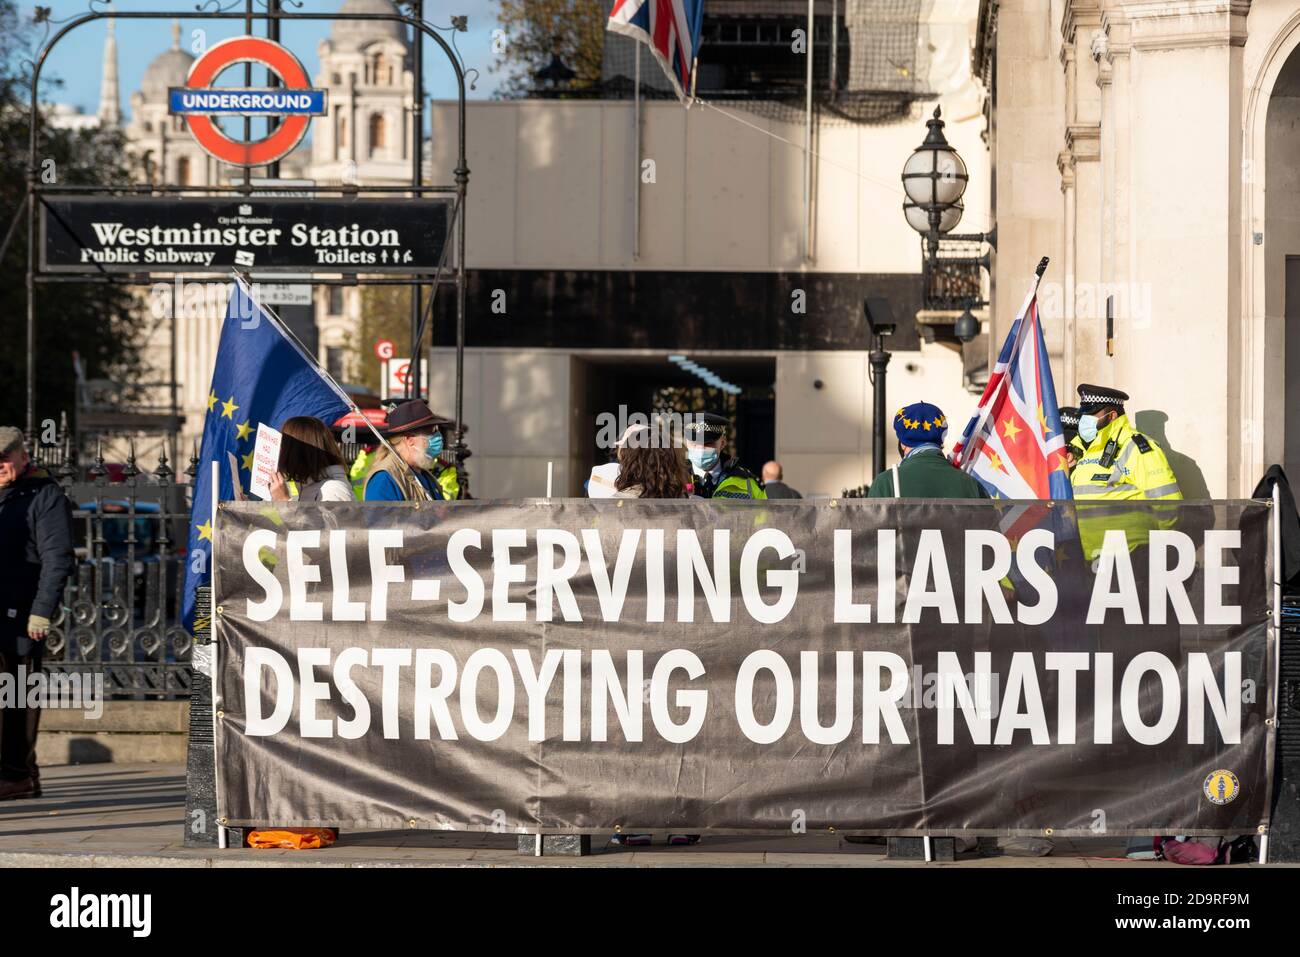 Anti government protest banner outside Parliament in Westminster, London, UK. Self serving liars are destroying our nation. Protesting Stock Photo